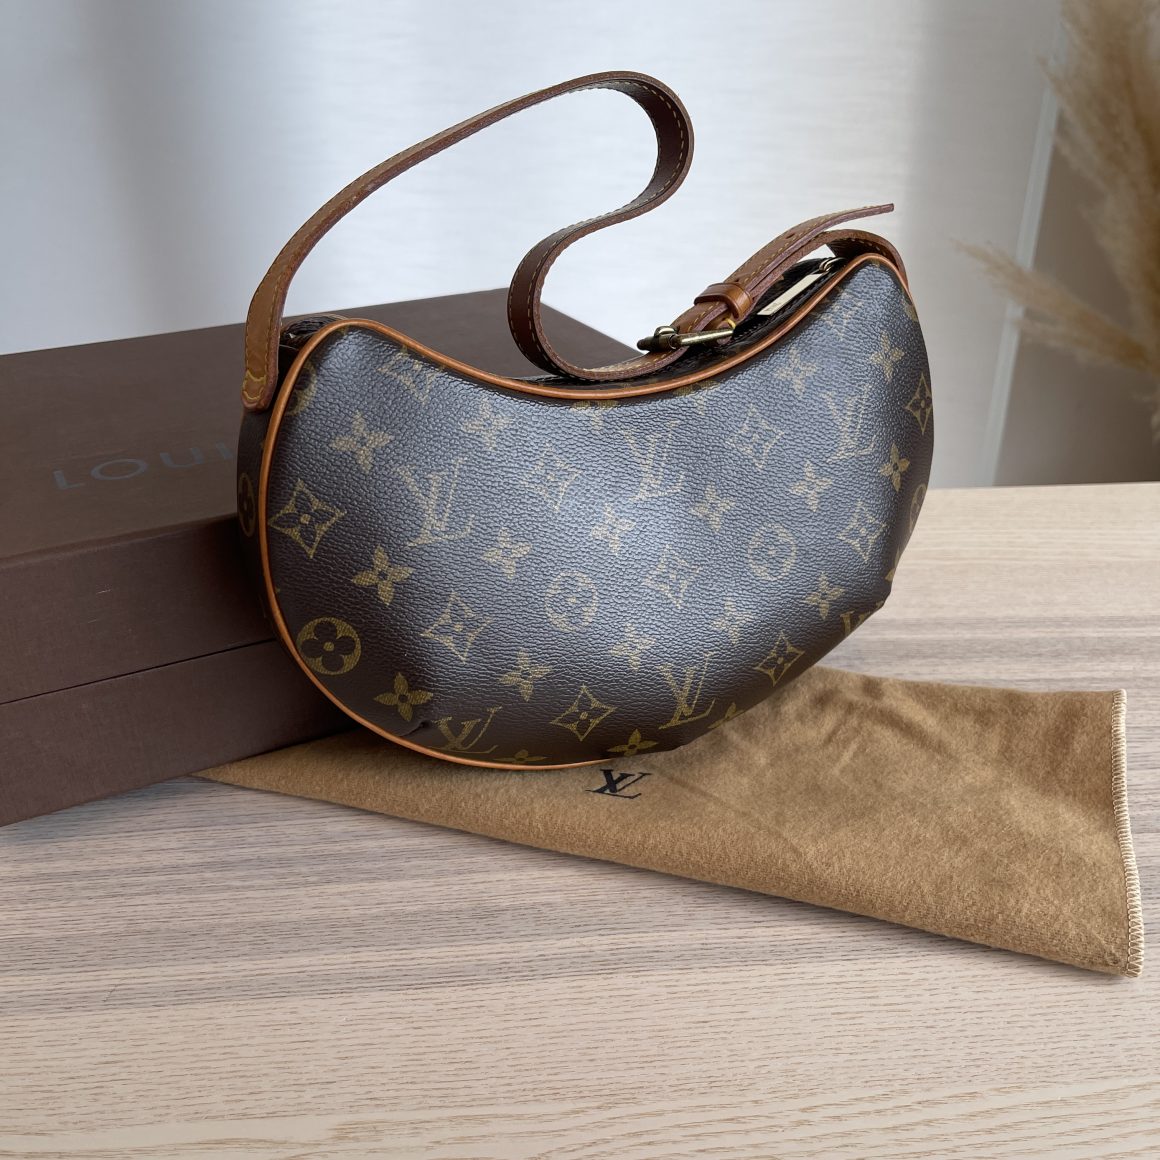 Louis Vuitton croissant pm bag available in store and online